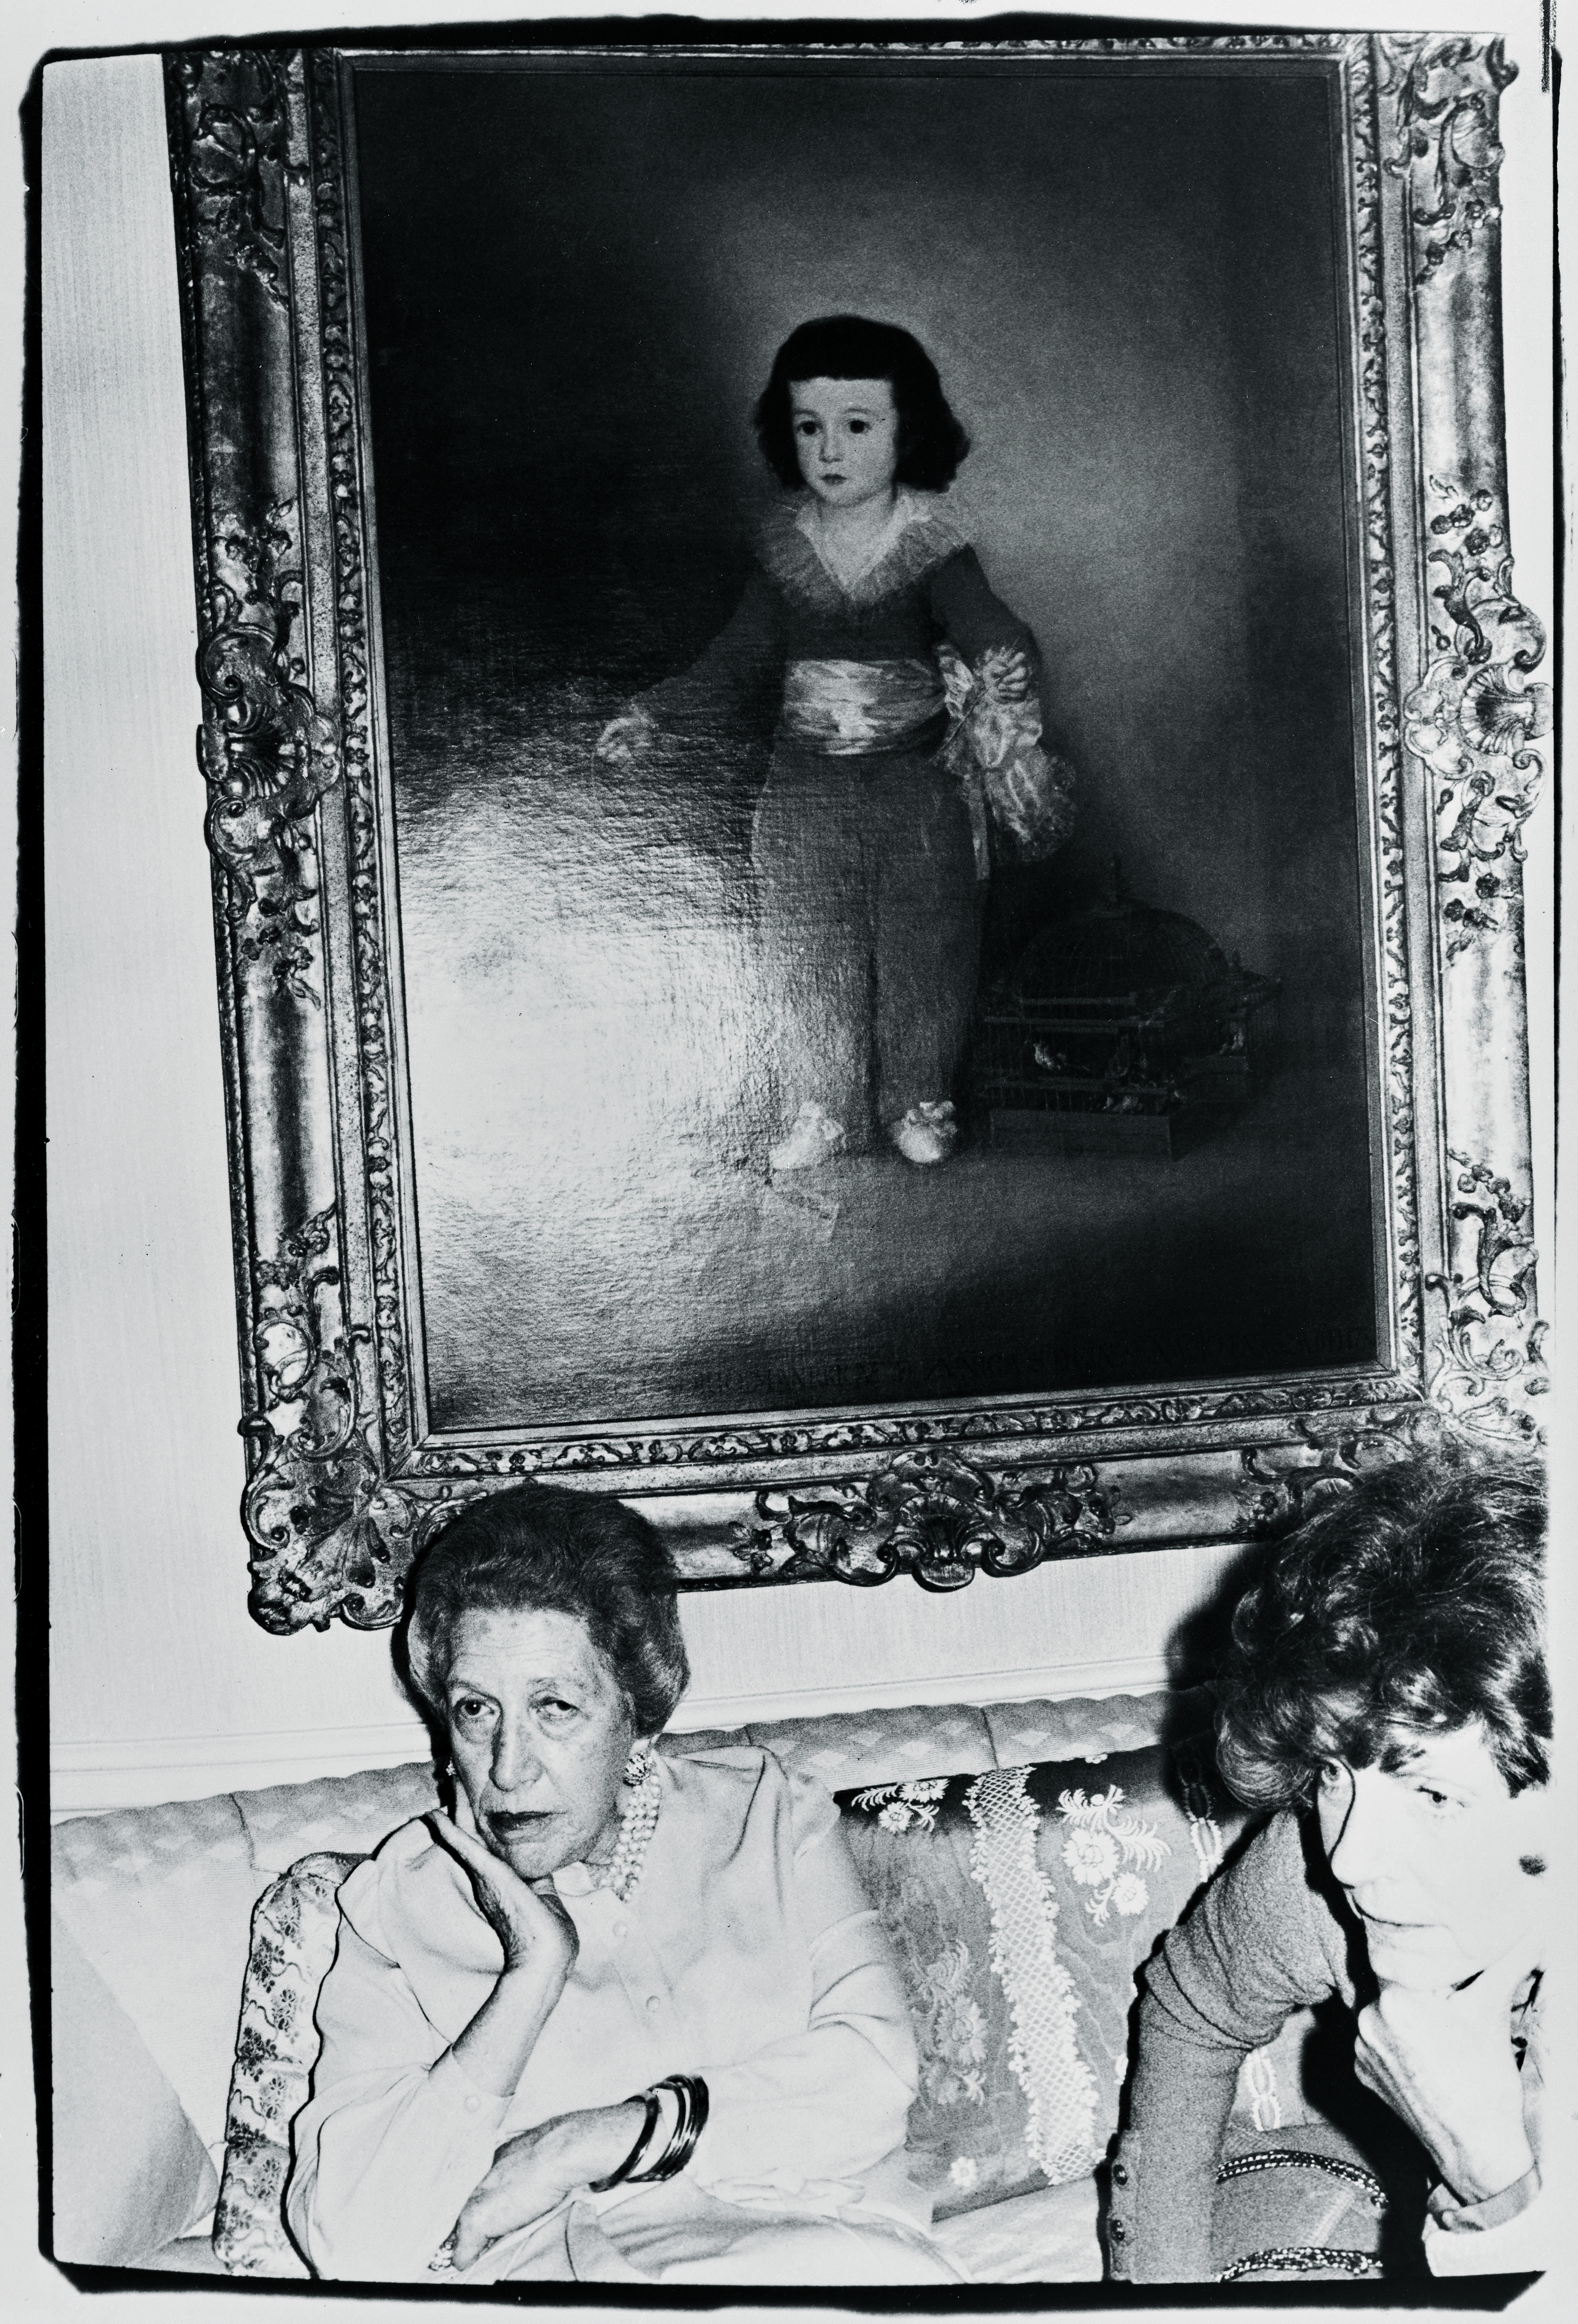 Andy Warhol (U.S.A., 1928–1987), Negative [Mrs. Gilbert Kitty Miller under her Goya "Red Boy"], c. 1979, Black-and-white negatives. Cantor Arts Center collection, Gift of The Andy Warhol Foundation for the Visual Arts, 2014.41.3604. © The Andy Warhol Foundation for the Visual Arts, Inc.